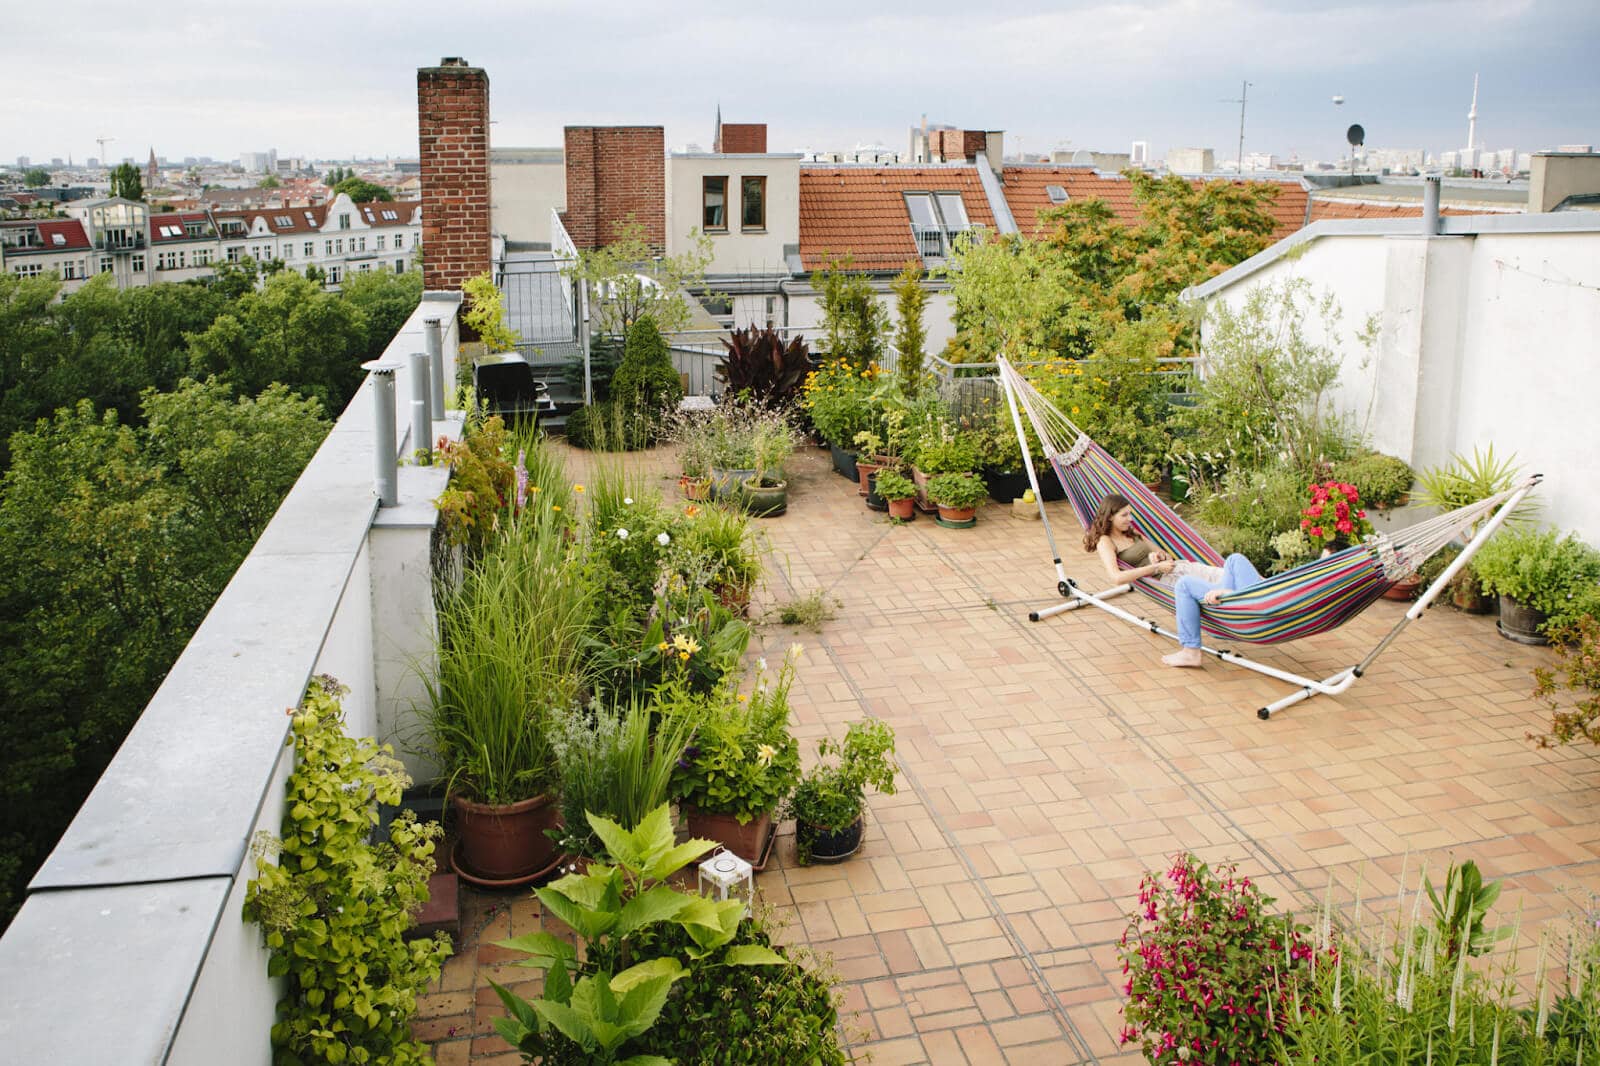 two people on a hammock in an outdoor patio full of plants and ceramic tile flooring